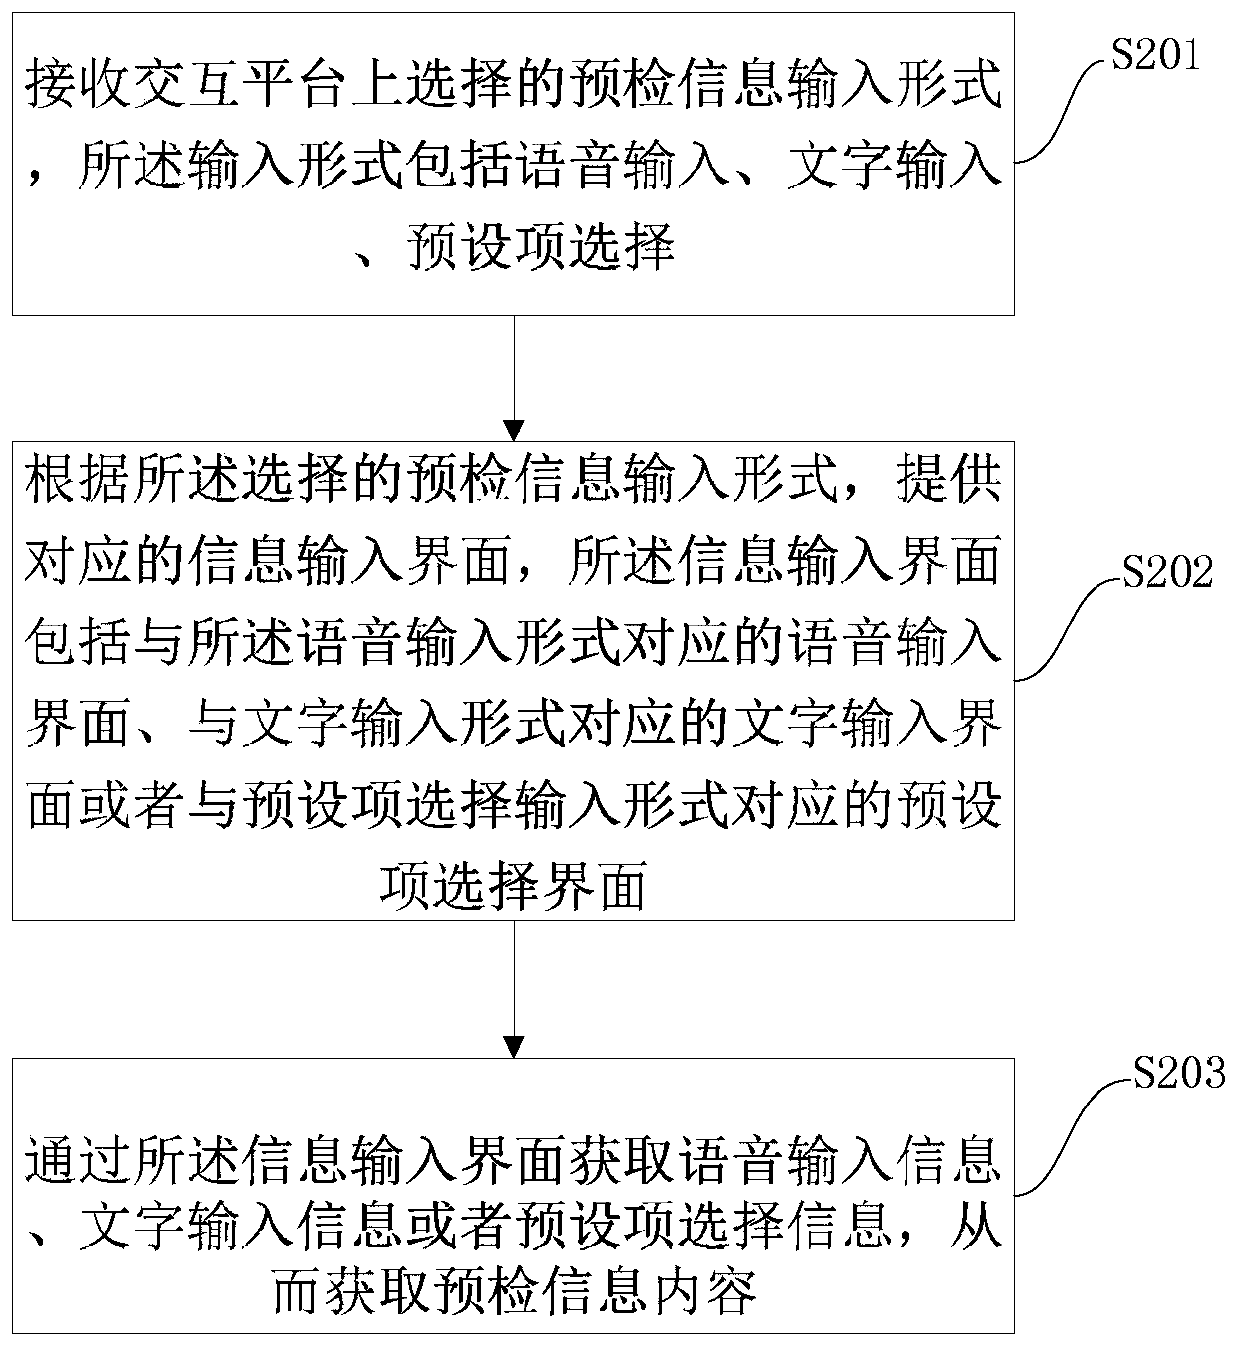 Pre-examination information interaction method based on data analysis and related equipment